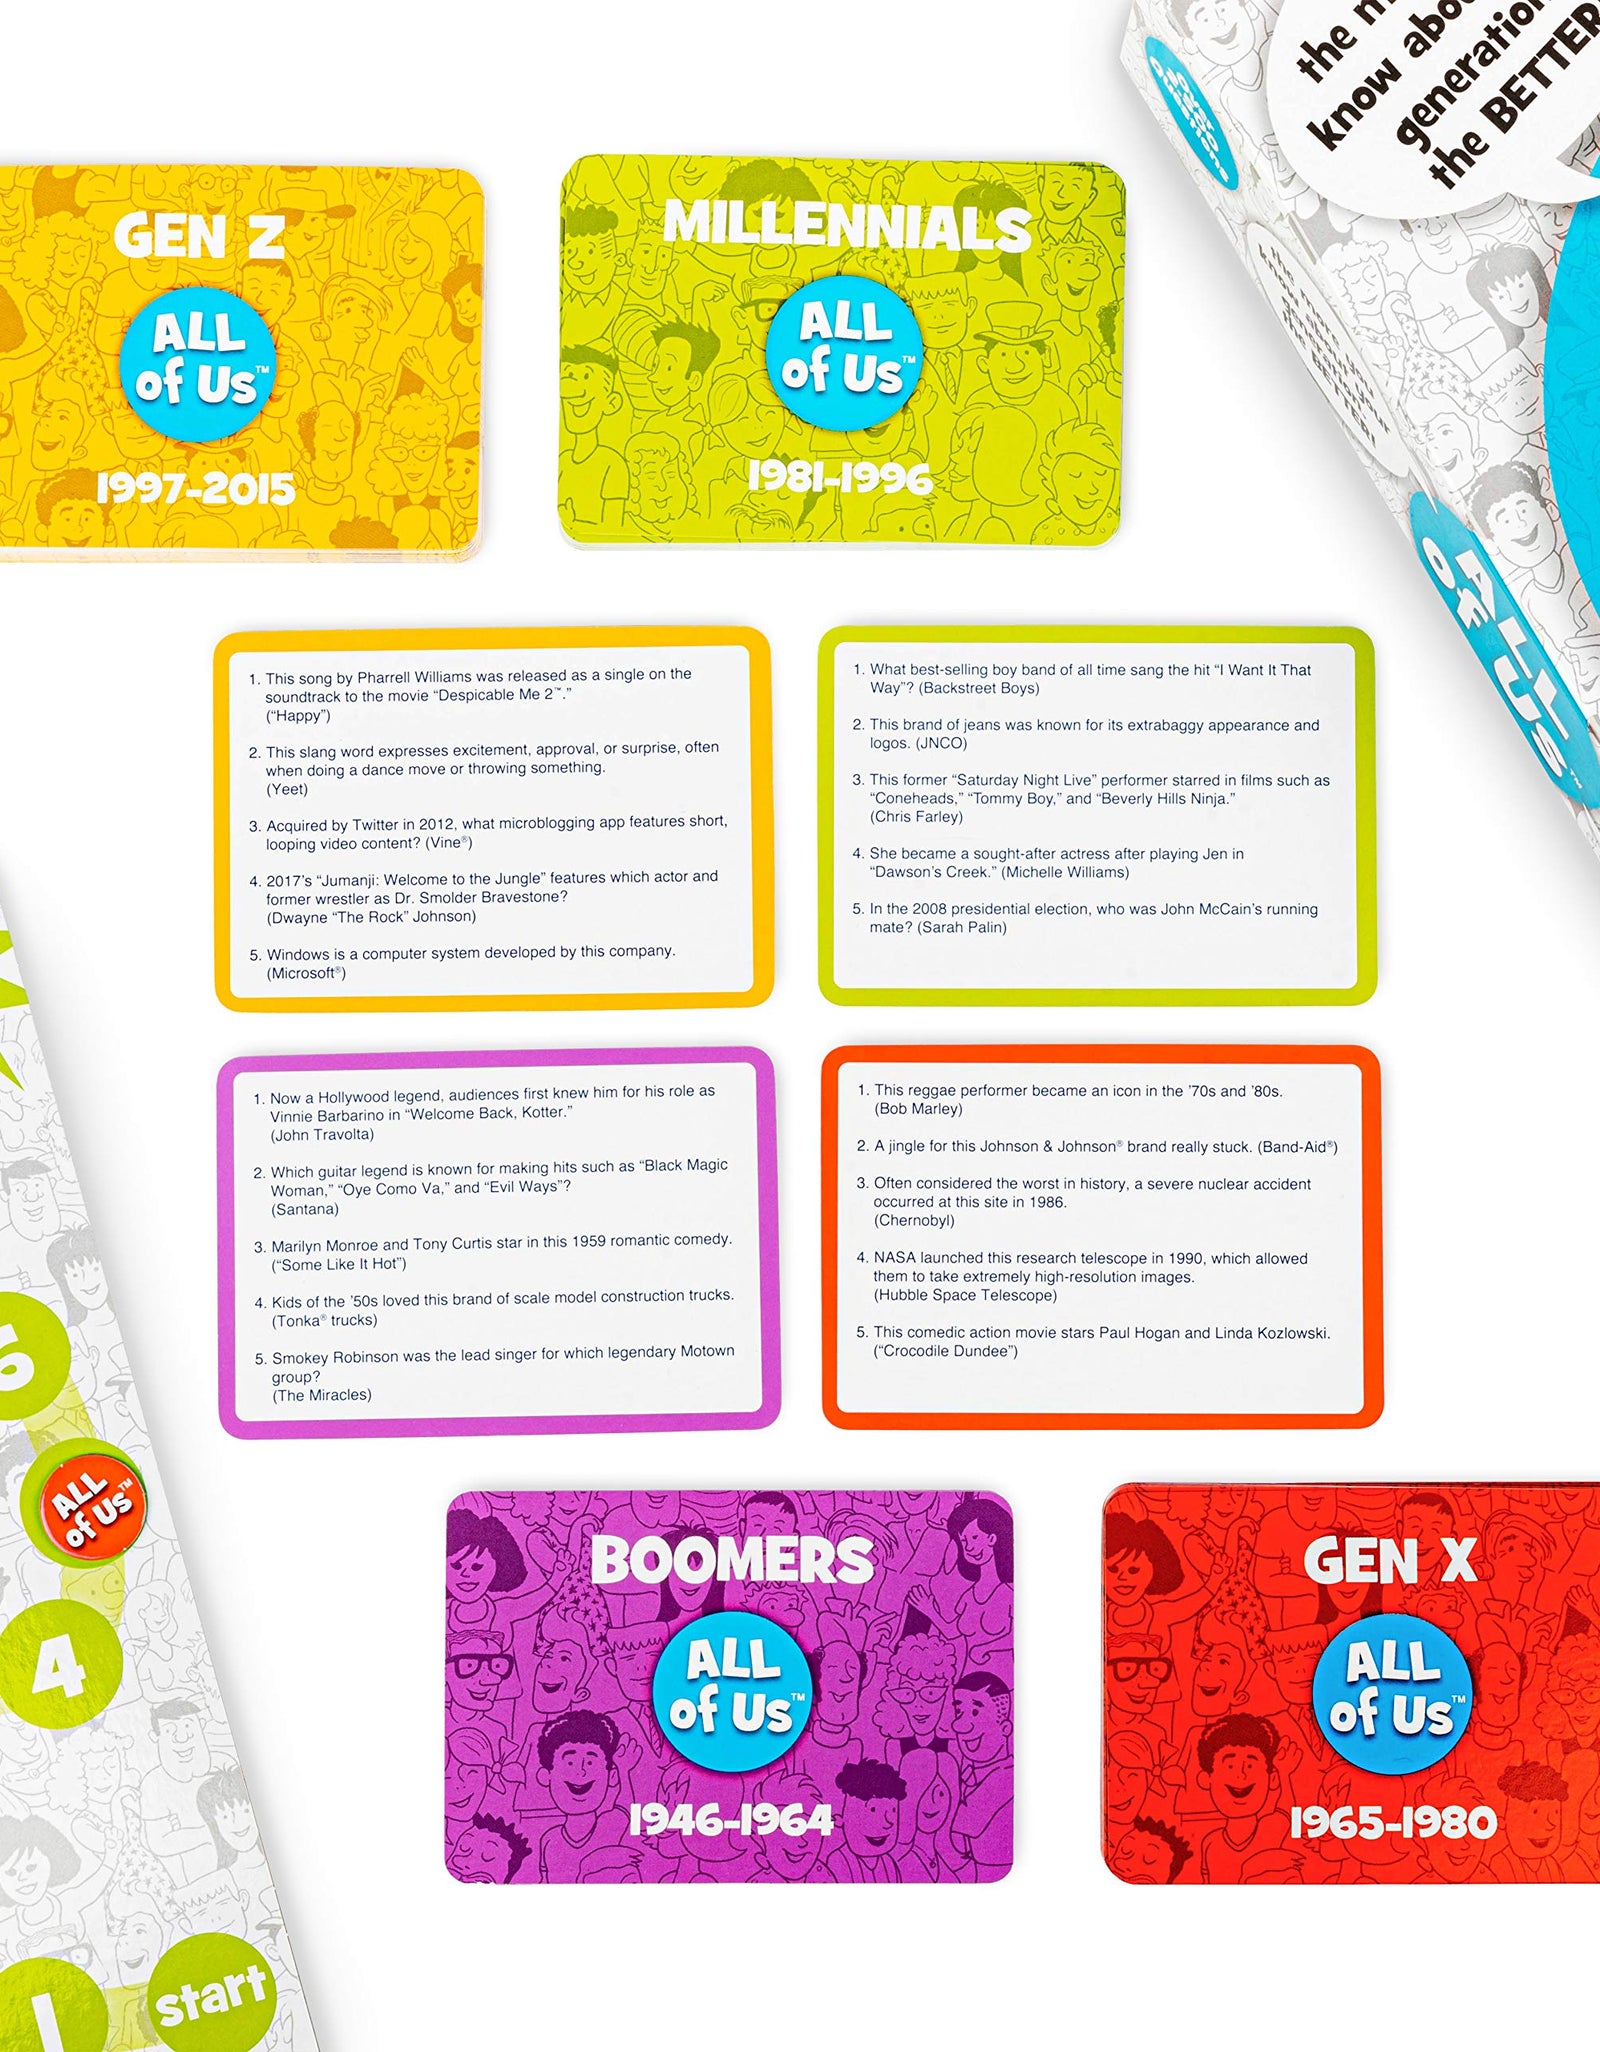 All of Us - The Family Trivia Game for All Generations - Gen Z, Gen Y, Gen X & Baby Boomers - by What Do You Meme?